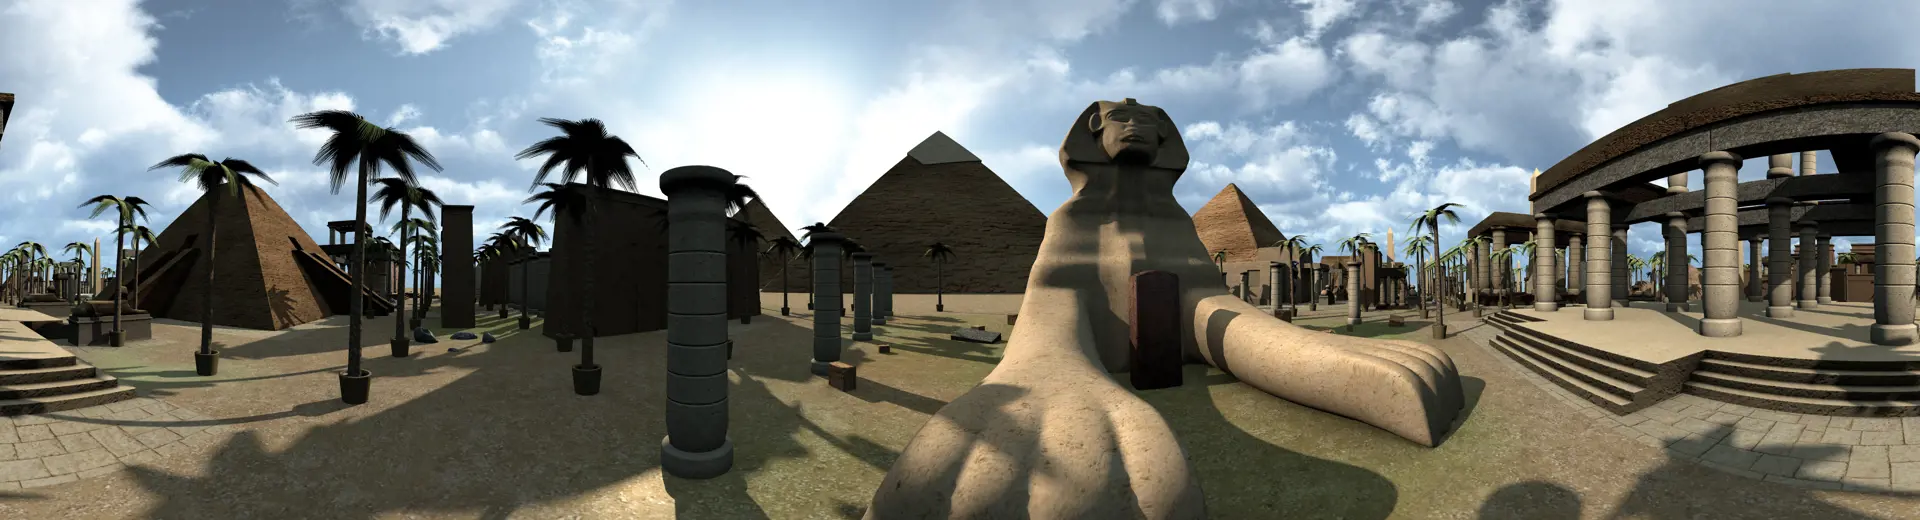 Panorama of ancient Egypt archtecture Sphinx and pyramids. 3D rendering. Adobe Stock fredmantel